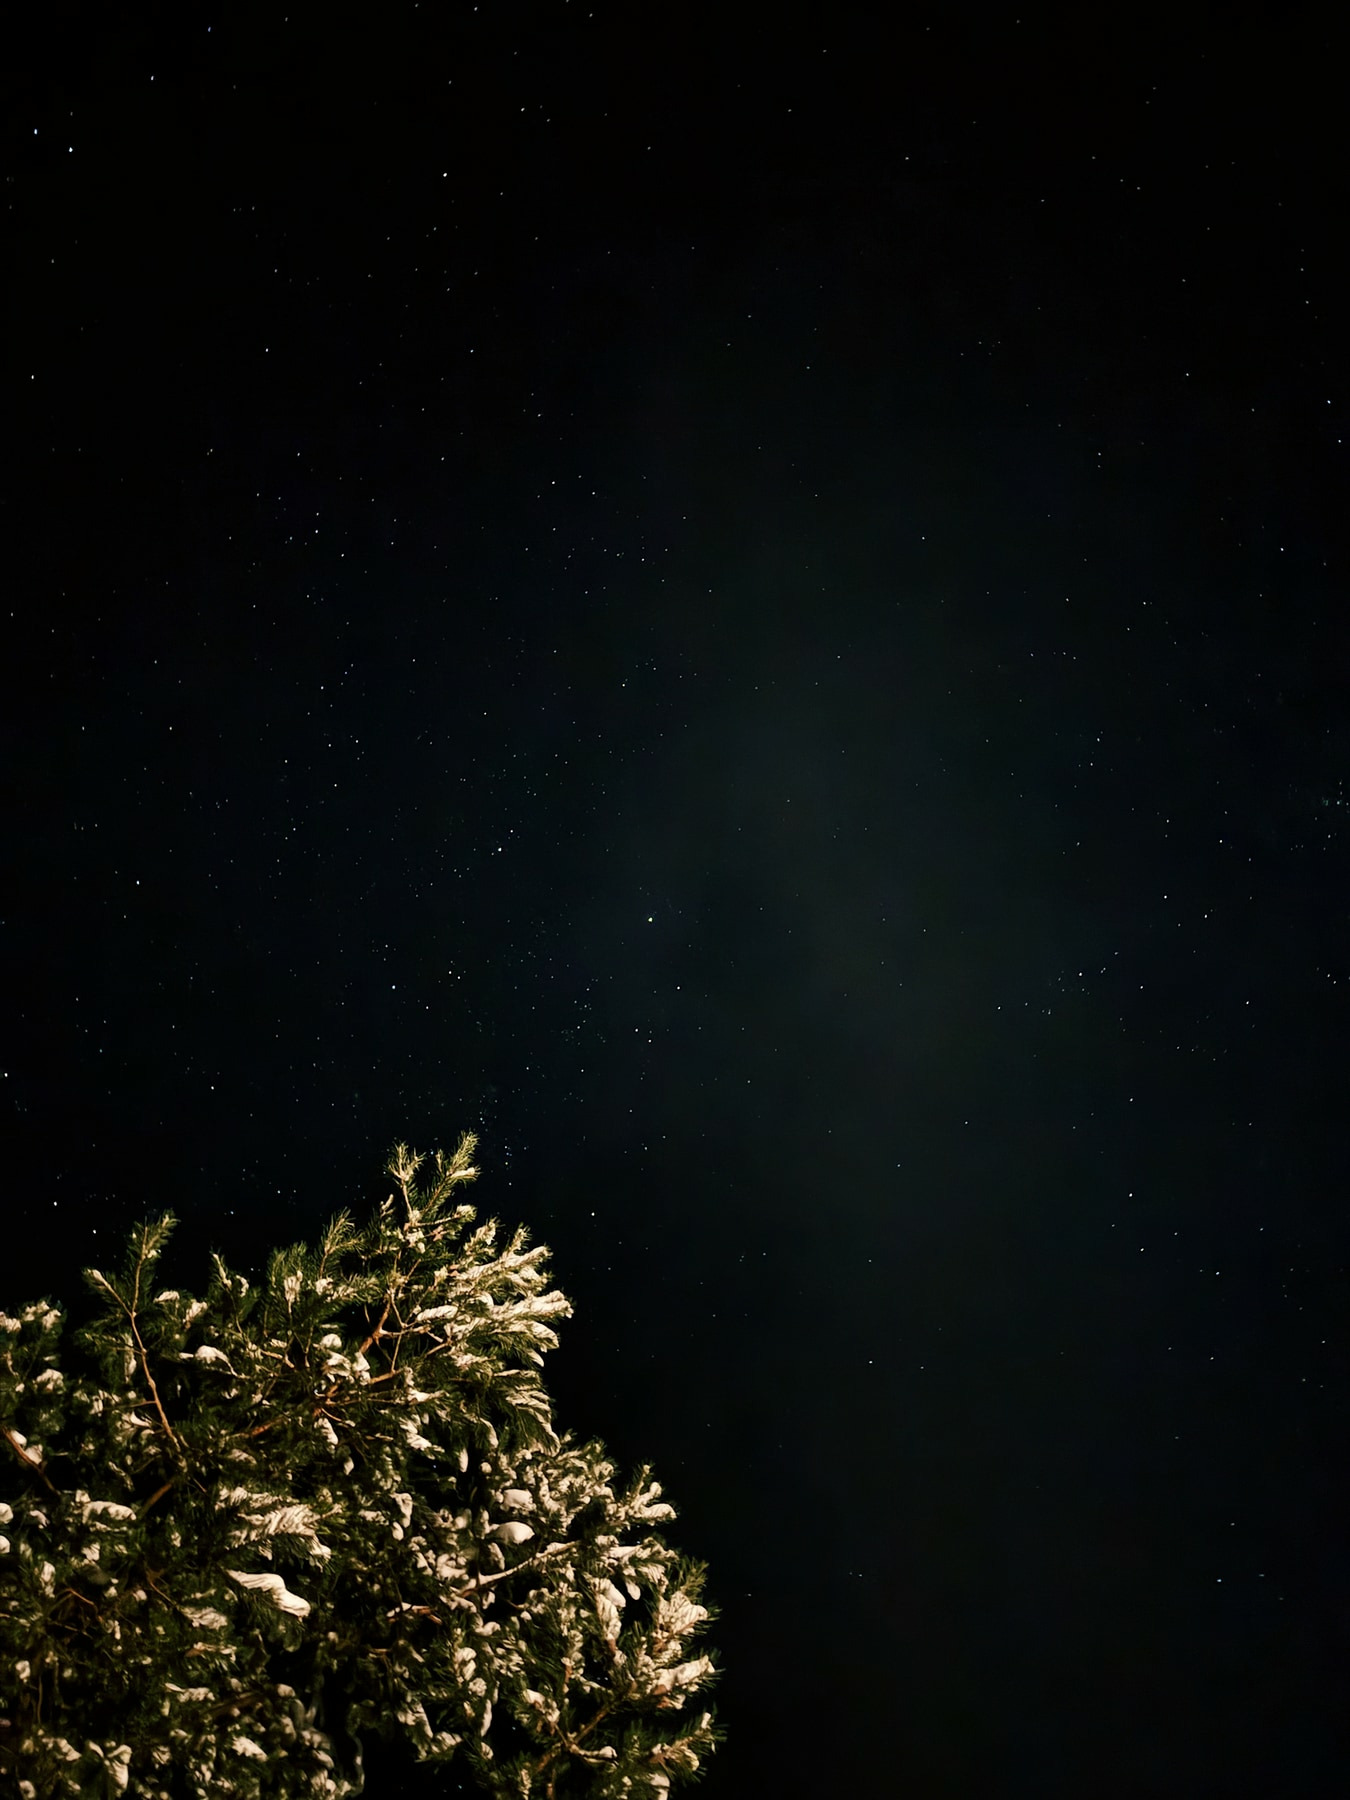 Star-filled night sky with a snow-covered evergreen tree in the foreground.